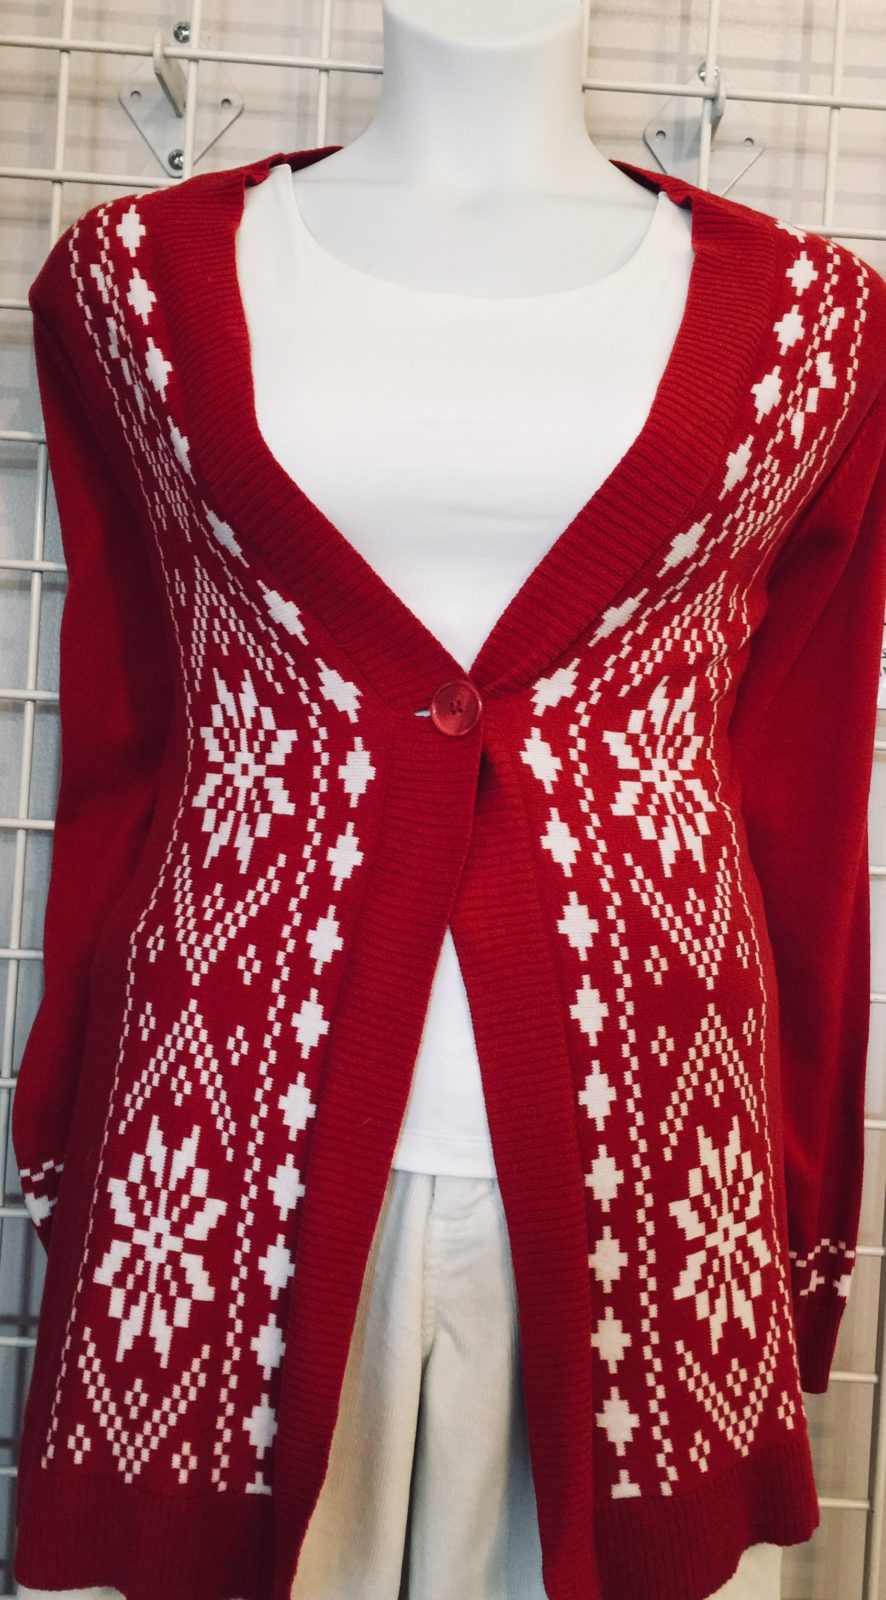 Red & White Christmas Sweater • Beautiful 1X sweater. Red with whites snowflake designs. Perfect for the holiday season!